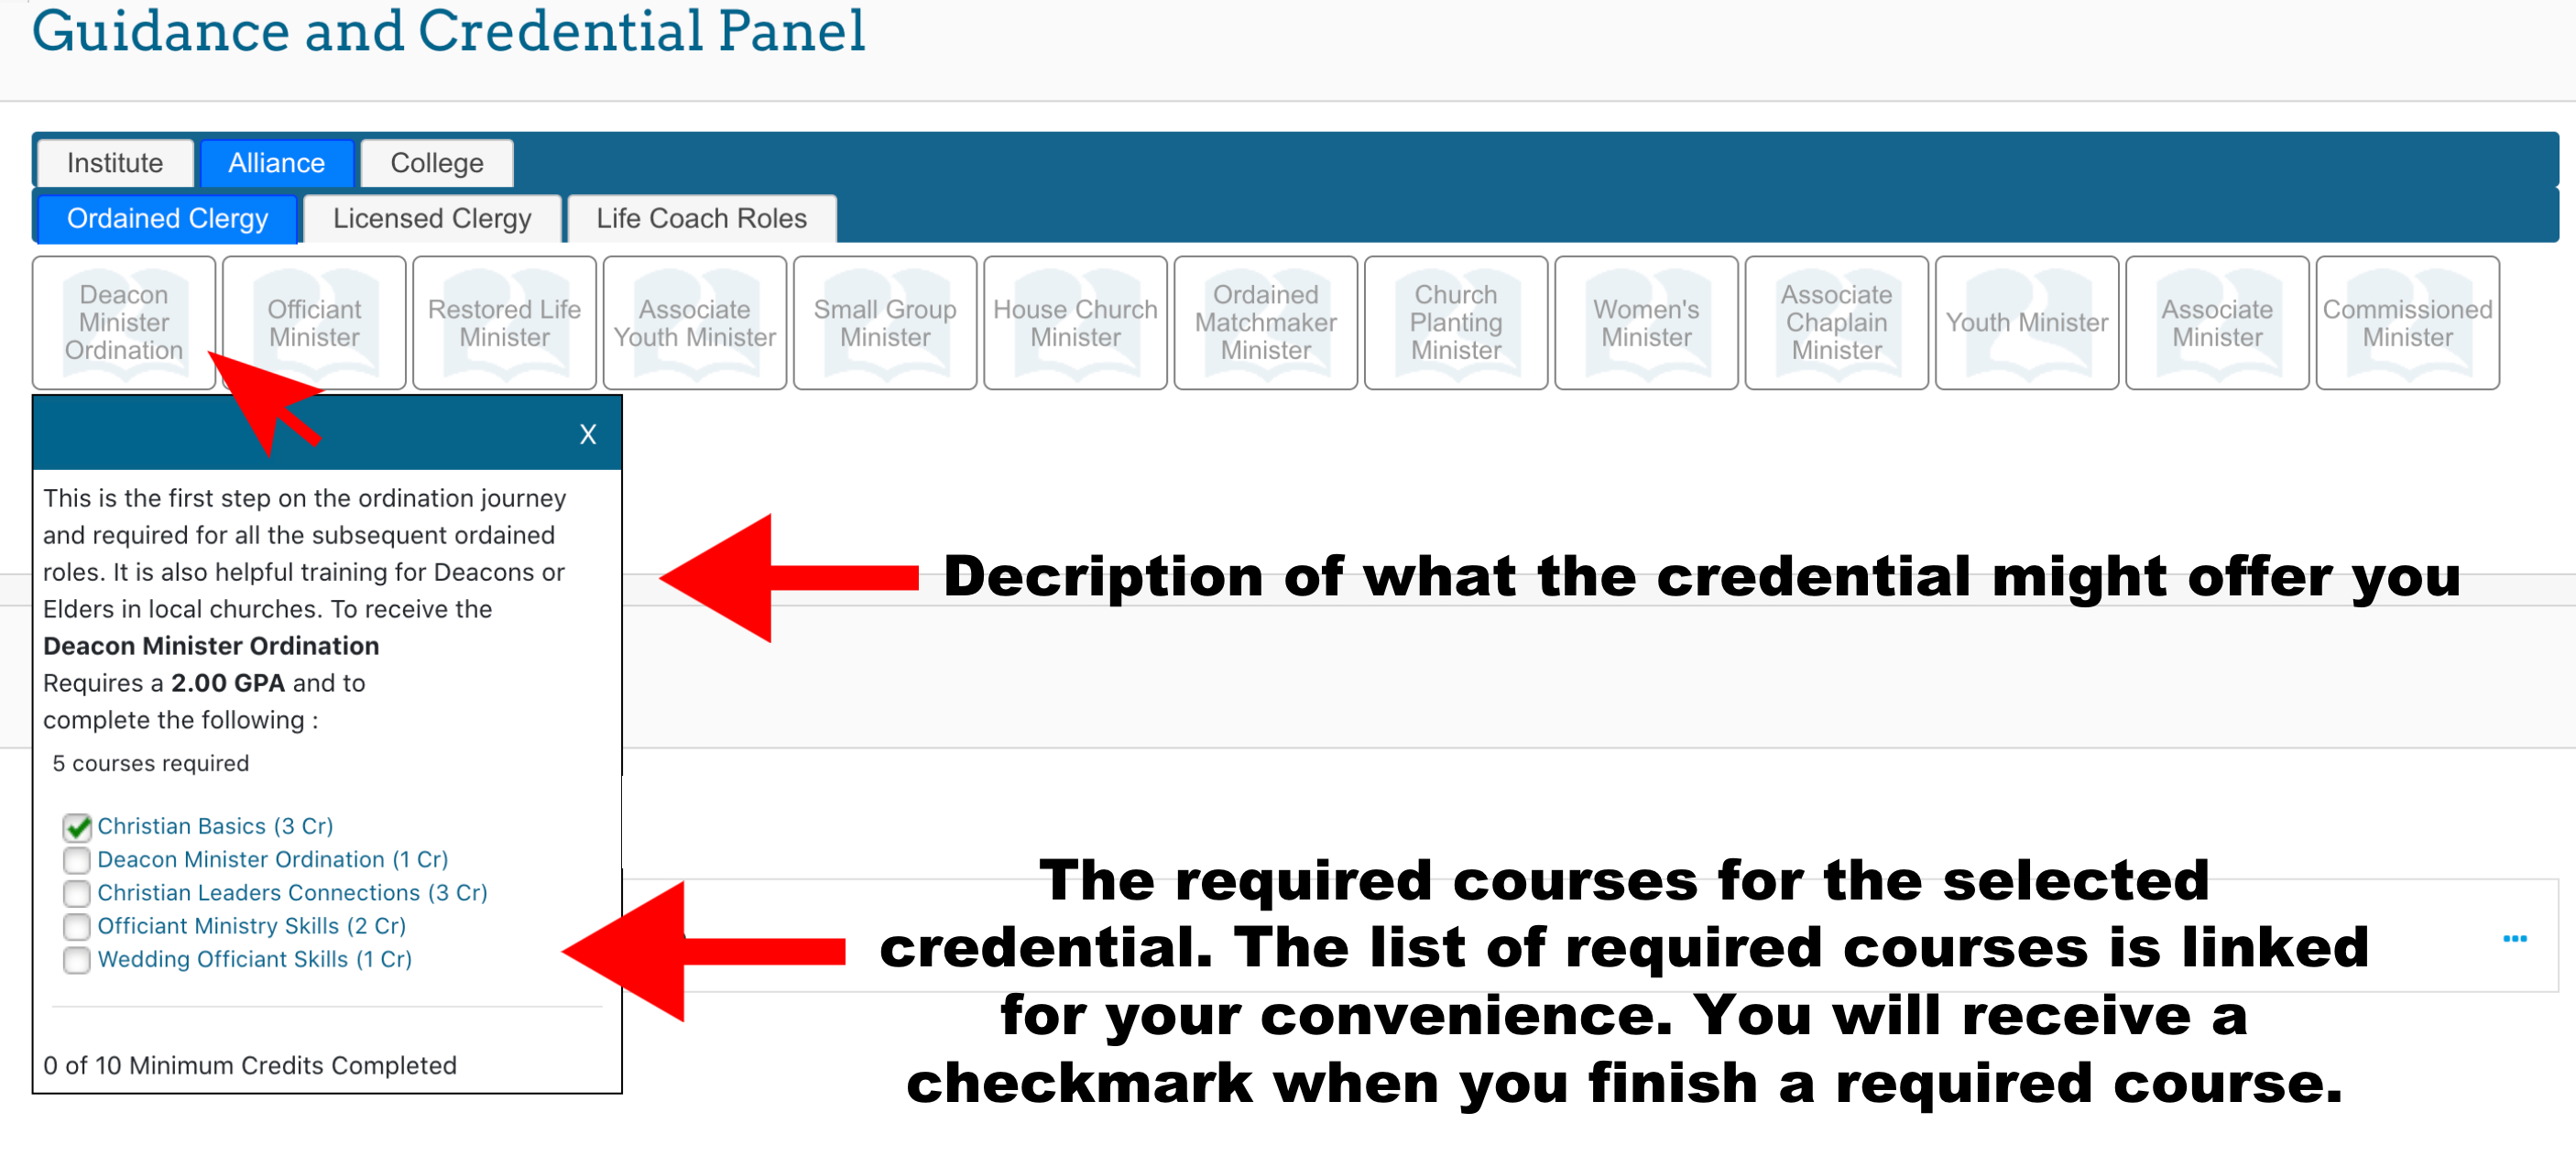 Guidance and Credential Panel Graphic